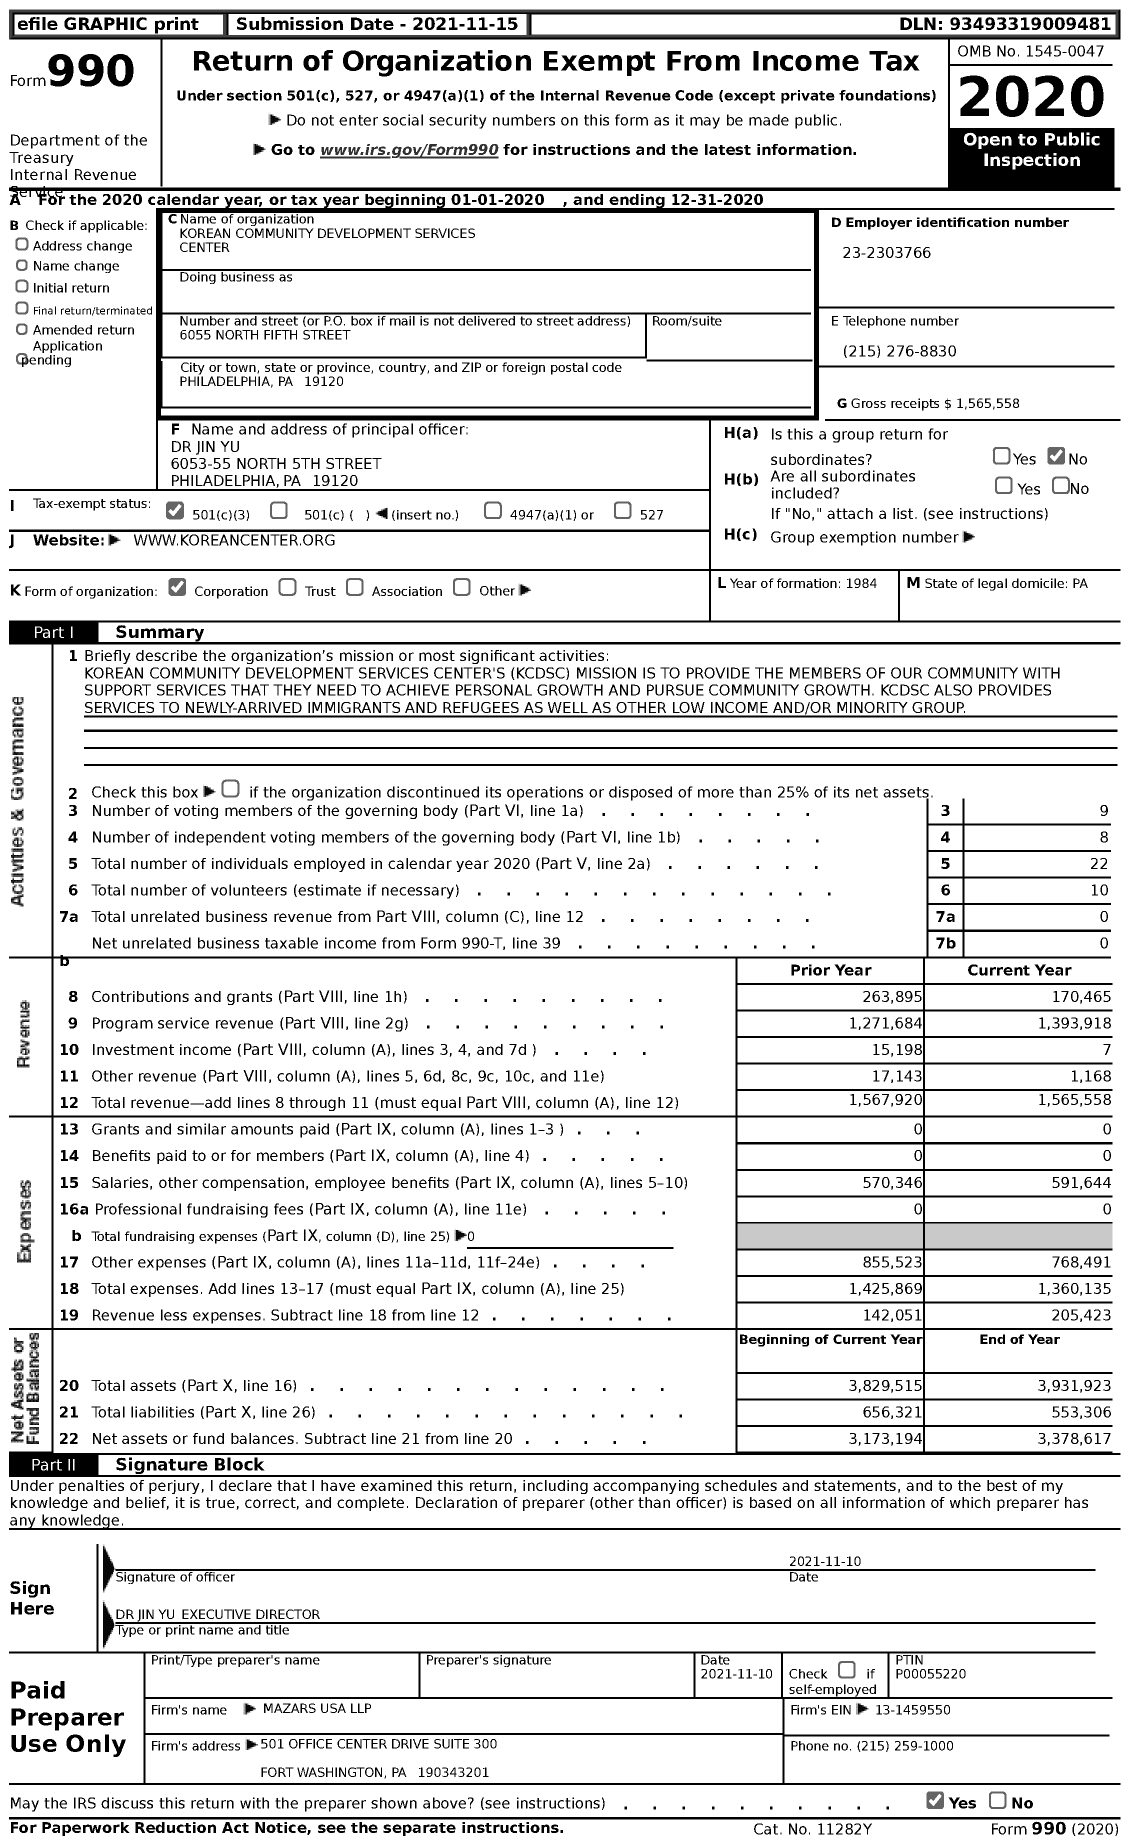 Image of first page of 2020 Form 990 for Korean Community Development Services Center (KCDSC)